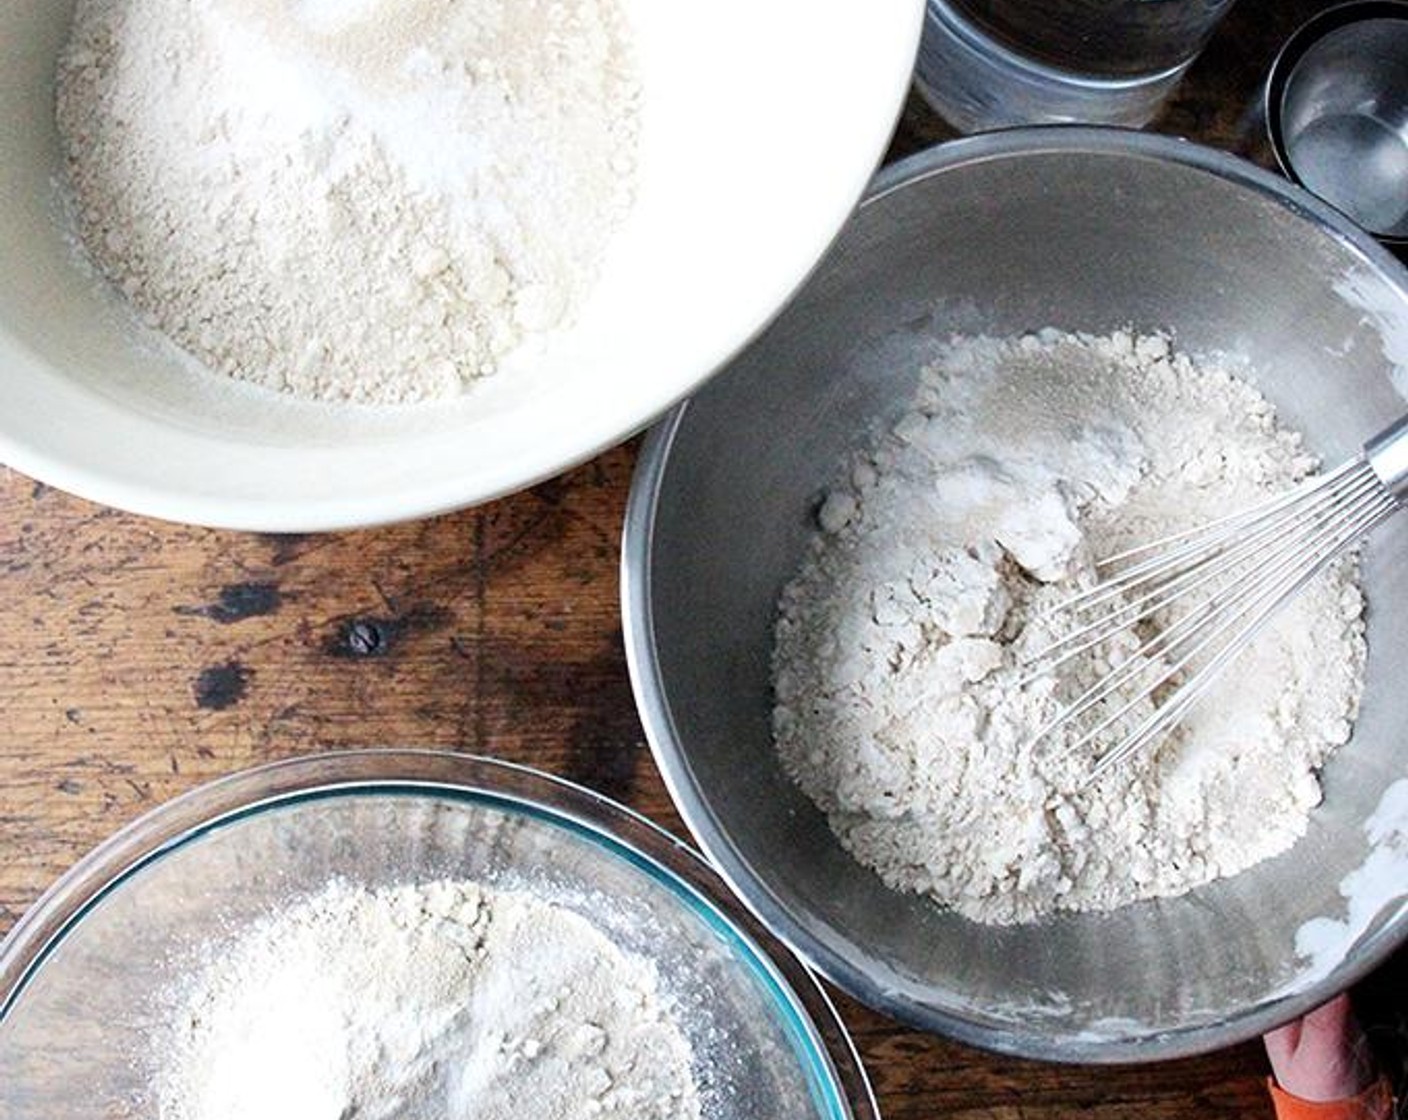 step 1 In a large bowl, whisk together Sprouted Wheat Flour (1 1/2 cups), Unbleached All Purpose Flour (1 1/2 cups), Kosher Salt (1/2 Tbsp), Granulated Sugar (1/2 Tbsp), Instant Dry Yeast (1/2 Tbsp). Add Water (1 1/2 cups) and Neutral Oil (3 Tbsp).